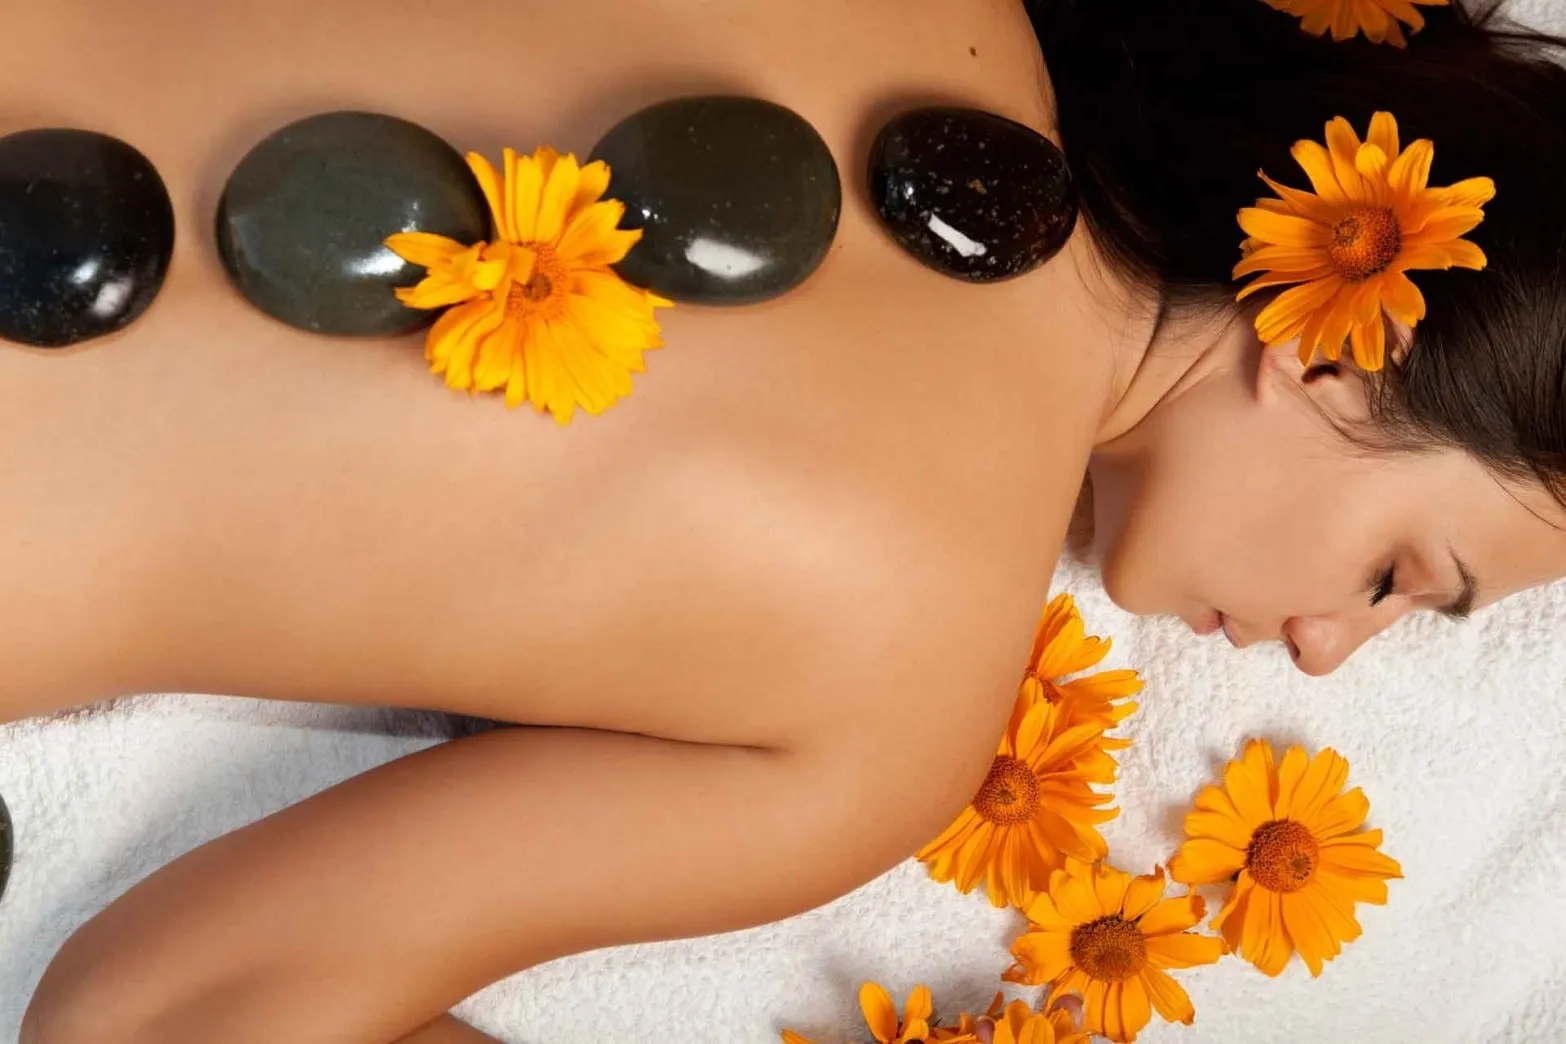 Body Massage Different Types and Benefits-Mediterranean Beauty